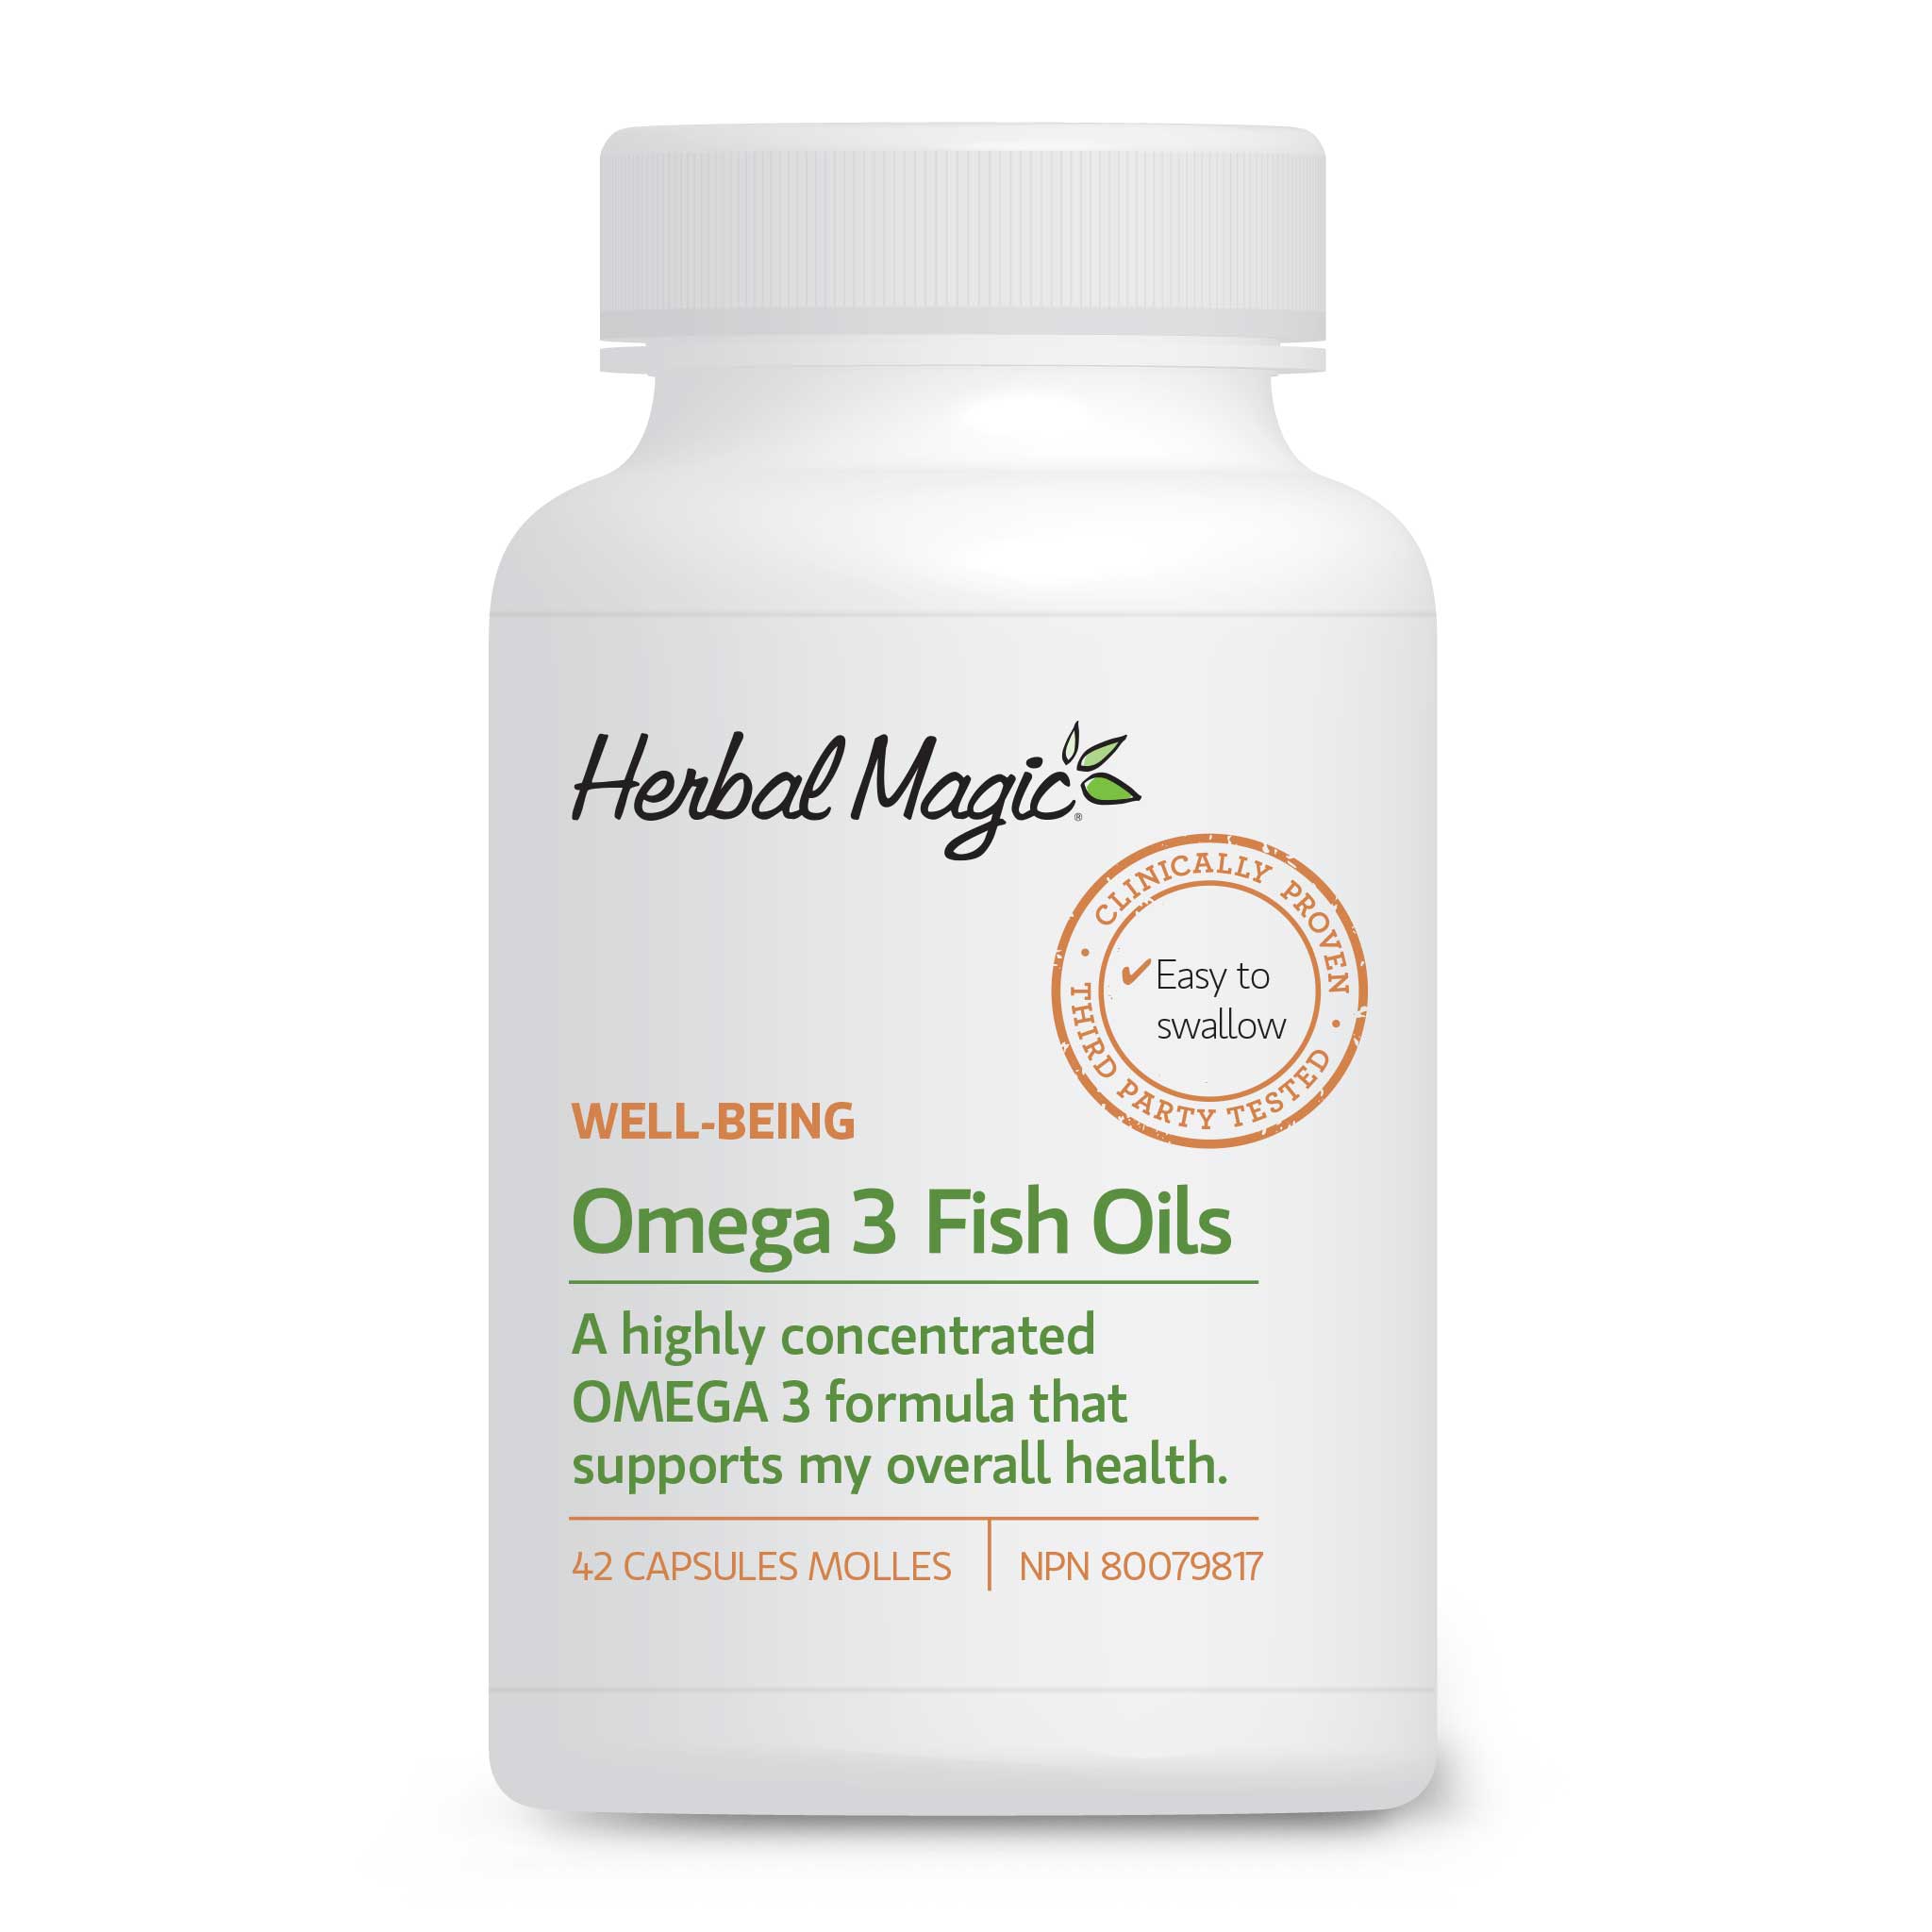 Herbal Magic's Omega Fish Oil supplement supports overall health